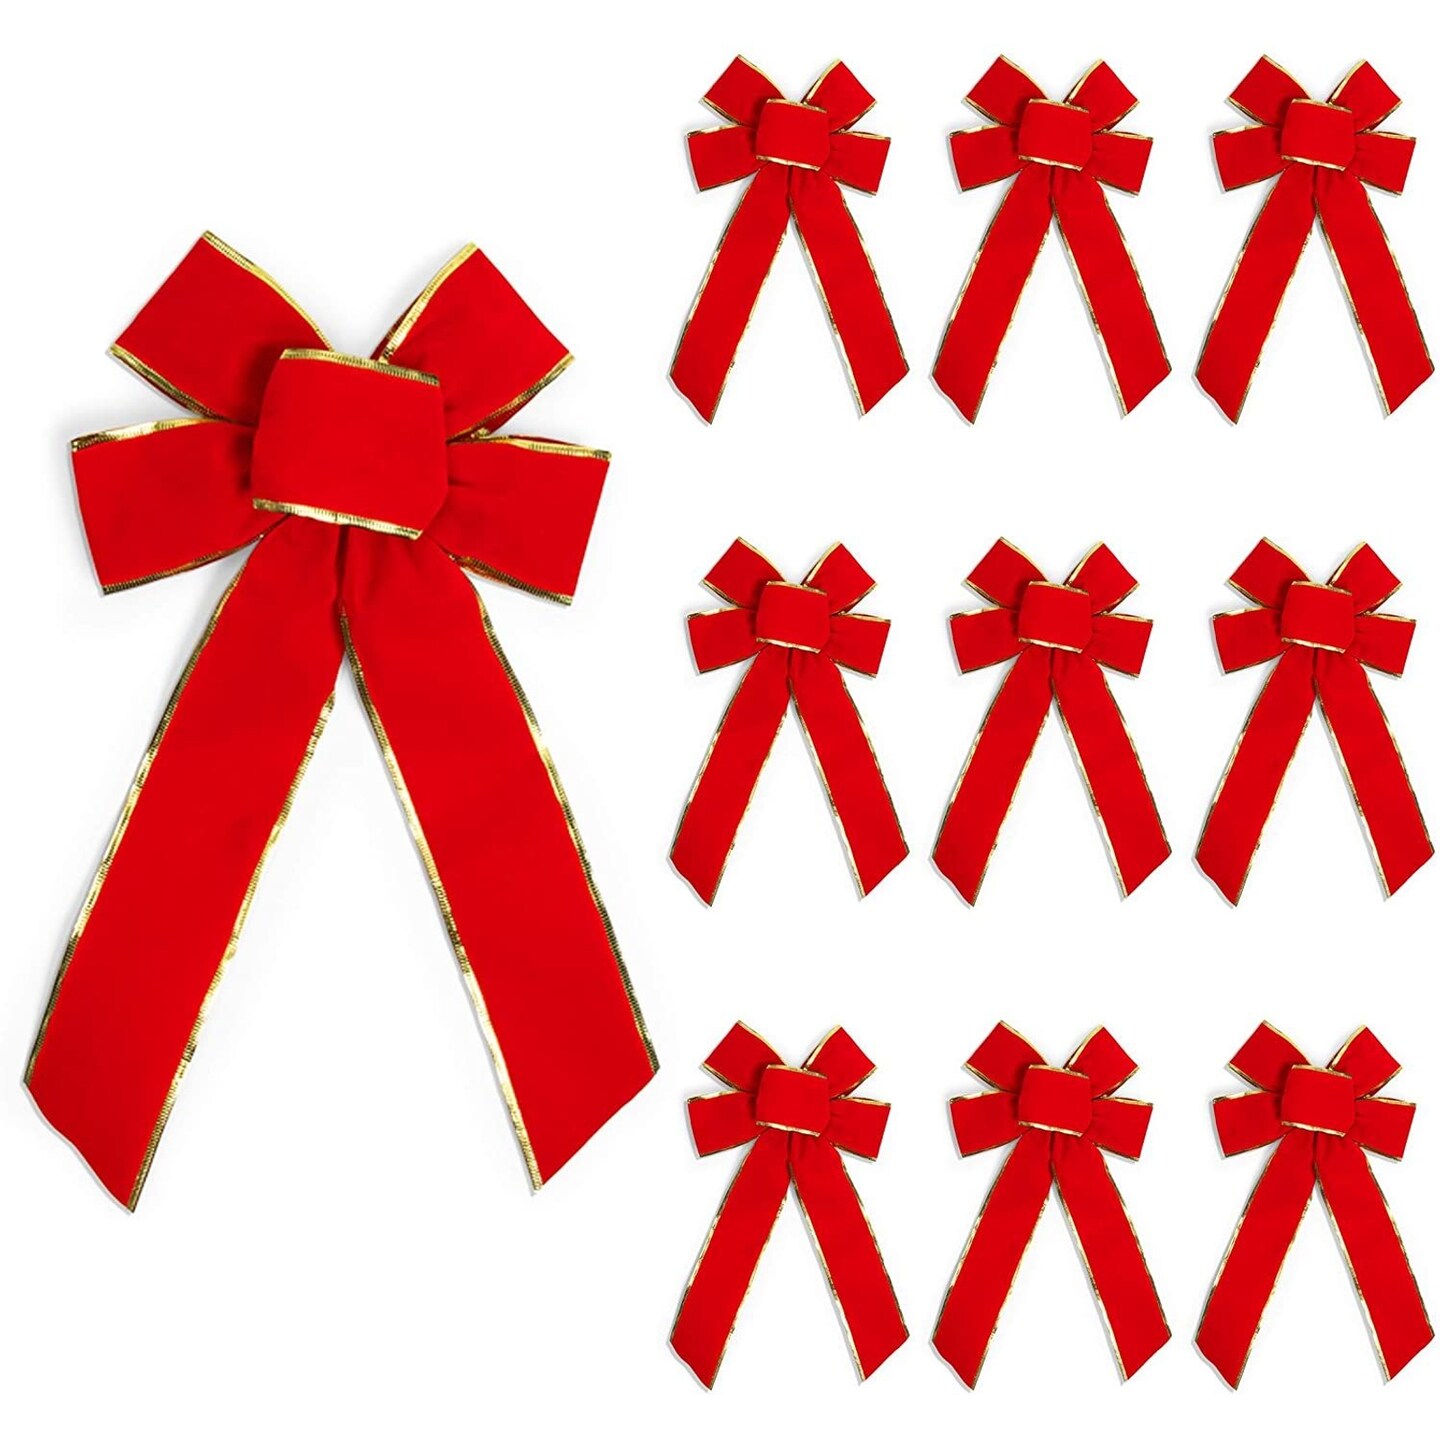 Red Ribbon Bow Large Red Bow Decorative Bows Florist Packing Decor 